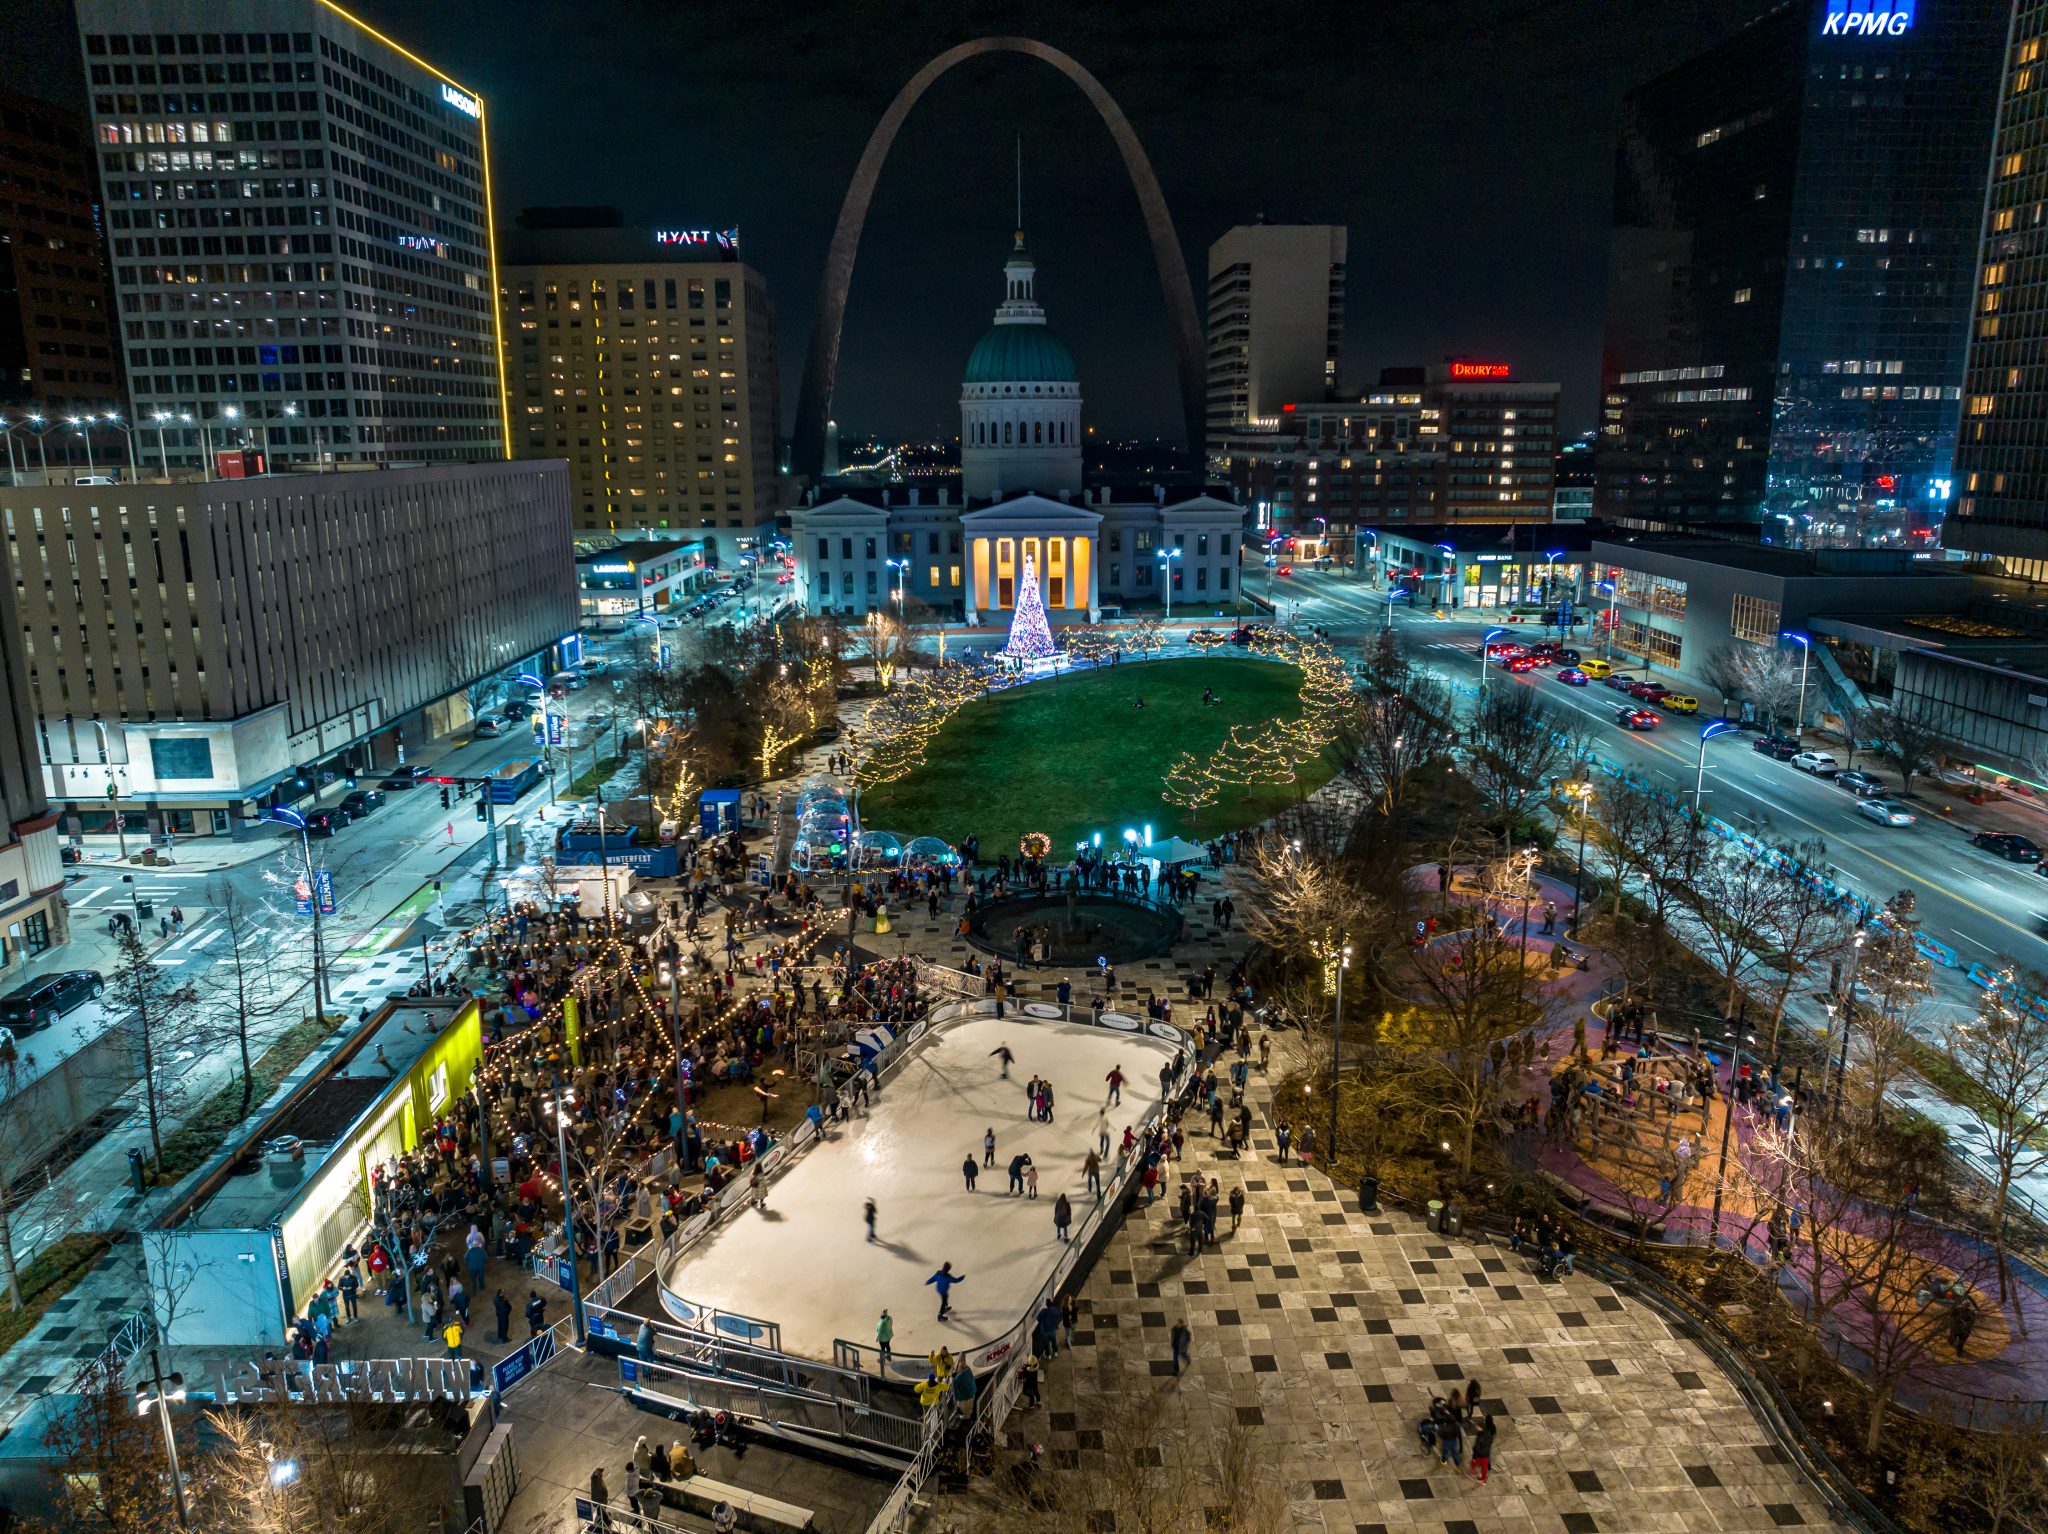 Aerial image of Kiener Plaza decorated for Winterfest at night. Provided by Gateway Arch Park Foundation.